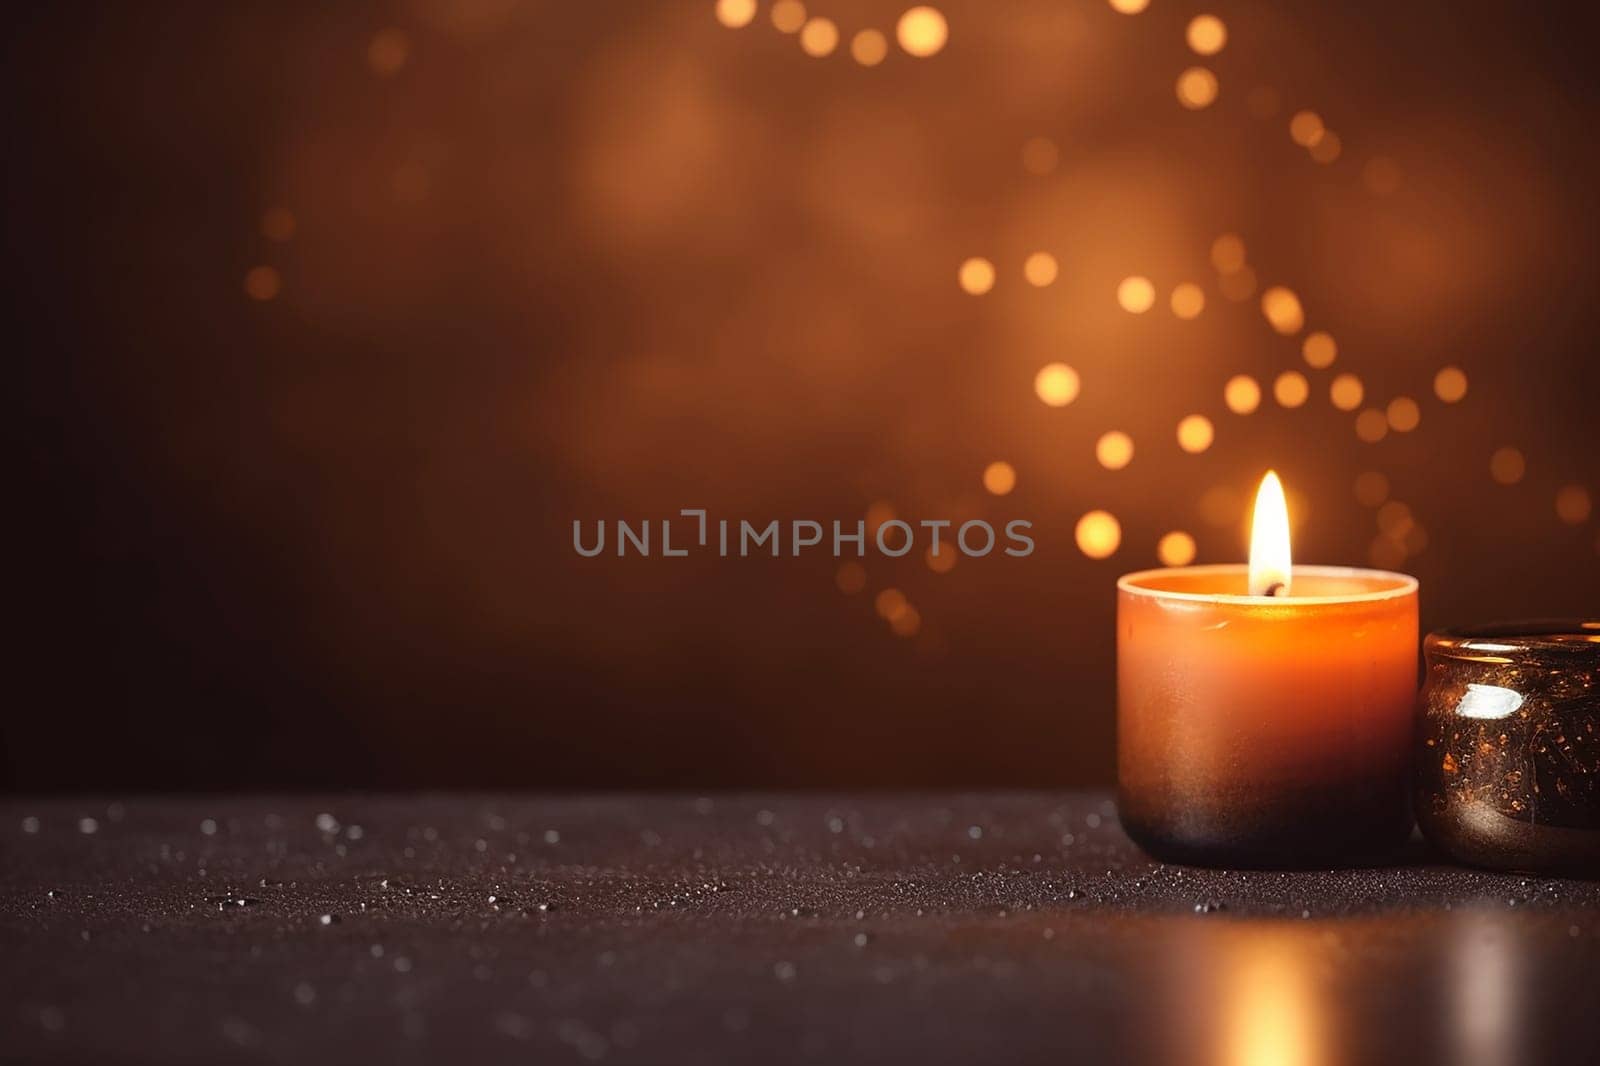 A lit candle with a warm glow on a glittering surface and bokeh background.